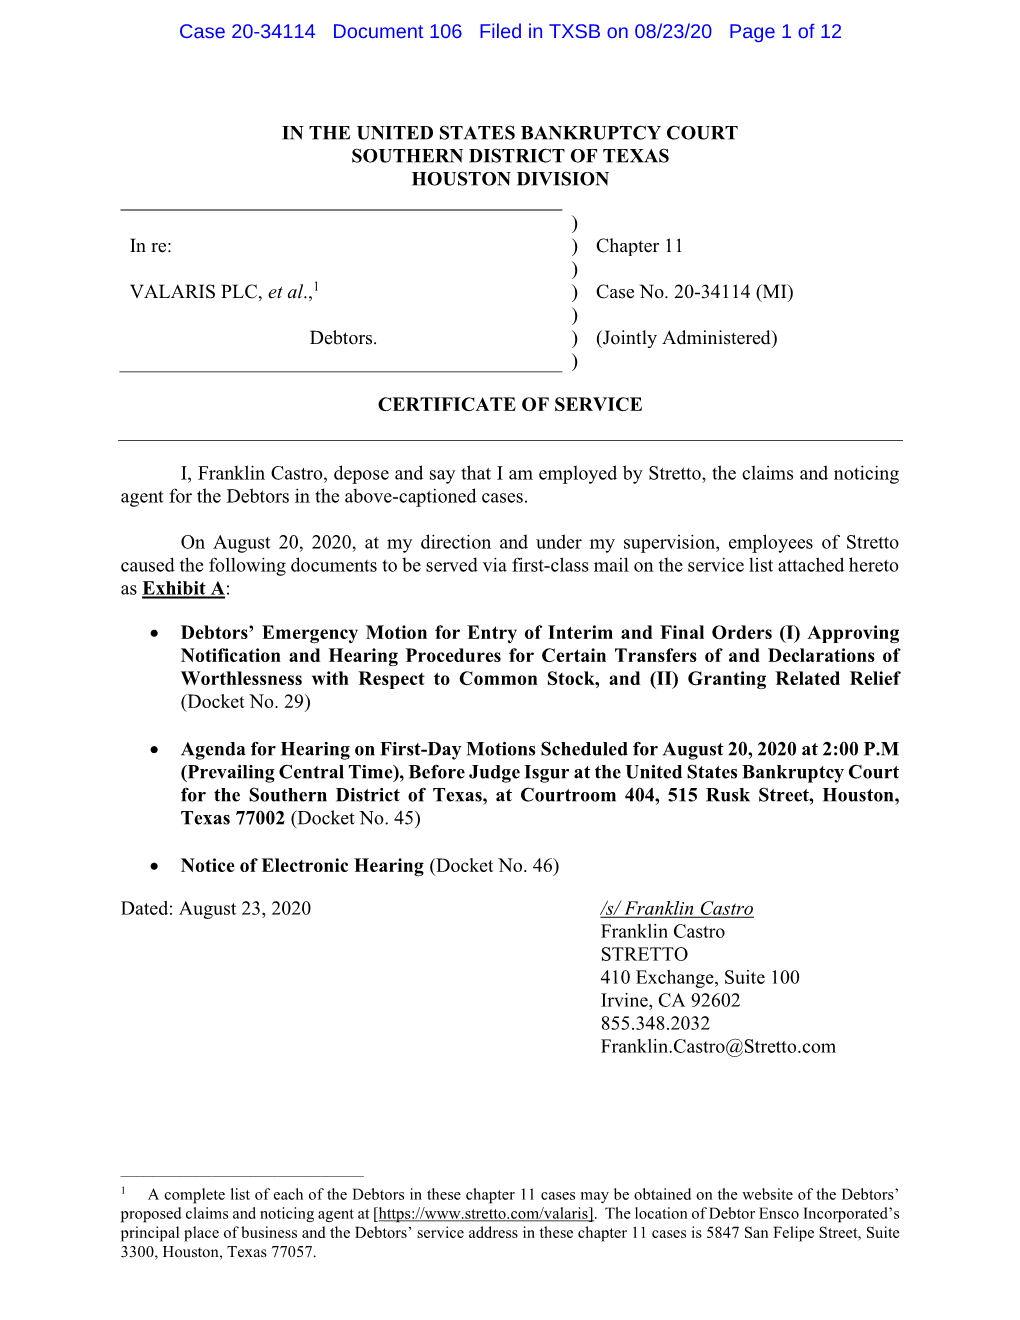 Case 20-34114 Document 106 Filed in TXSB on 08/23/20 Page 1 of 12